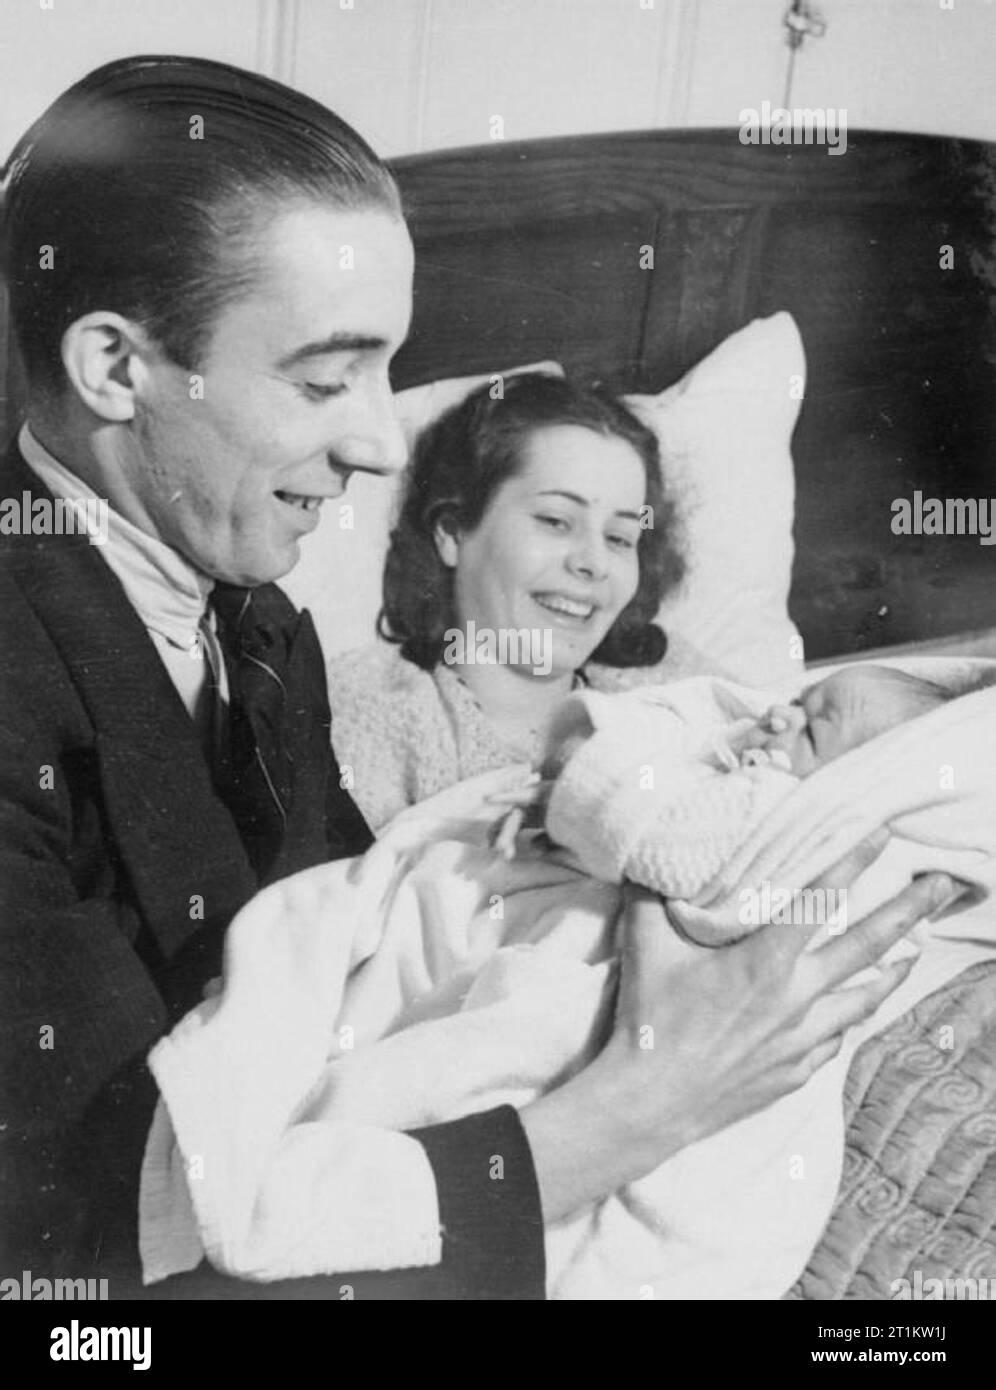 An Expectant Mother in Wartime, London, England, March 1940 Mr Bentley holds his newborn son, as his wife Vera rests in bed behind him at their home in Goldhawk Road, West London, March 1940. Stock Photo